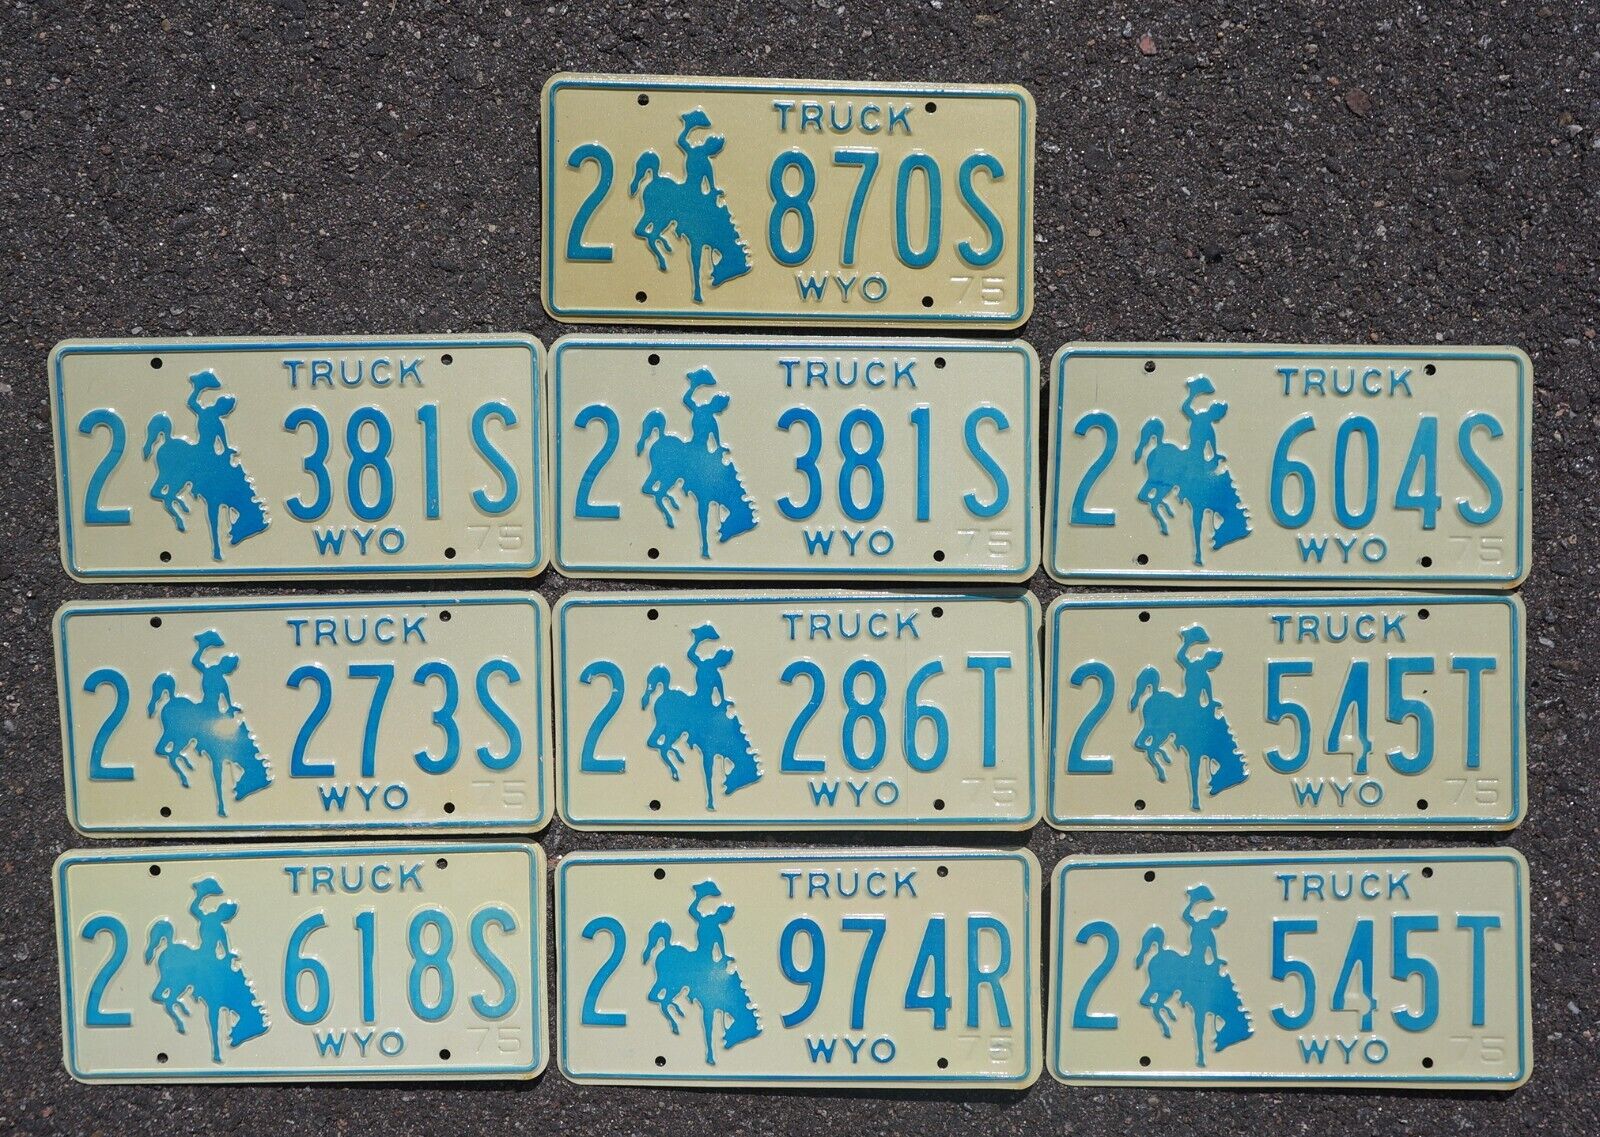 1975 WYOMING TRUCK LICENSE PLATE - LOT OF 10 - NICE QUALITY COWBOY PLATES